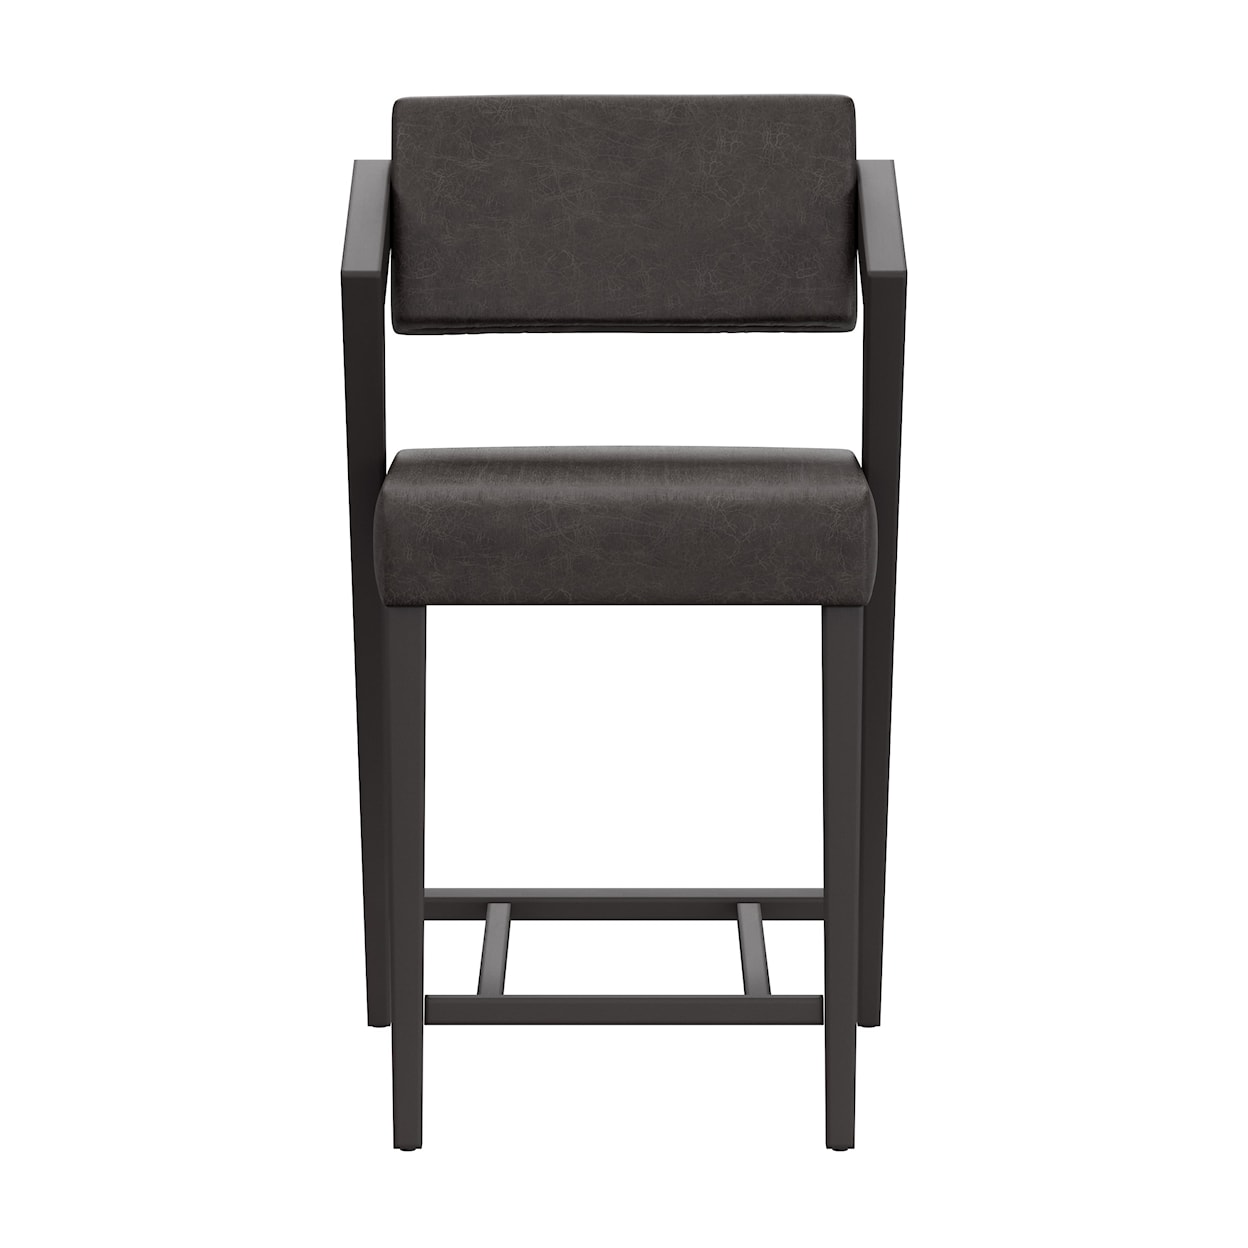 Hillsdale Snyder Counter Stool